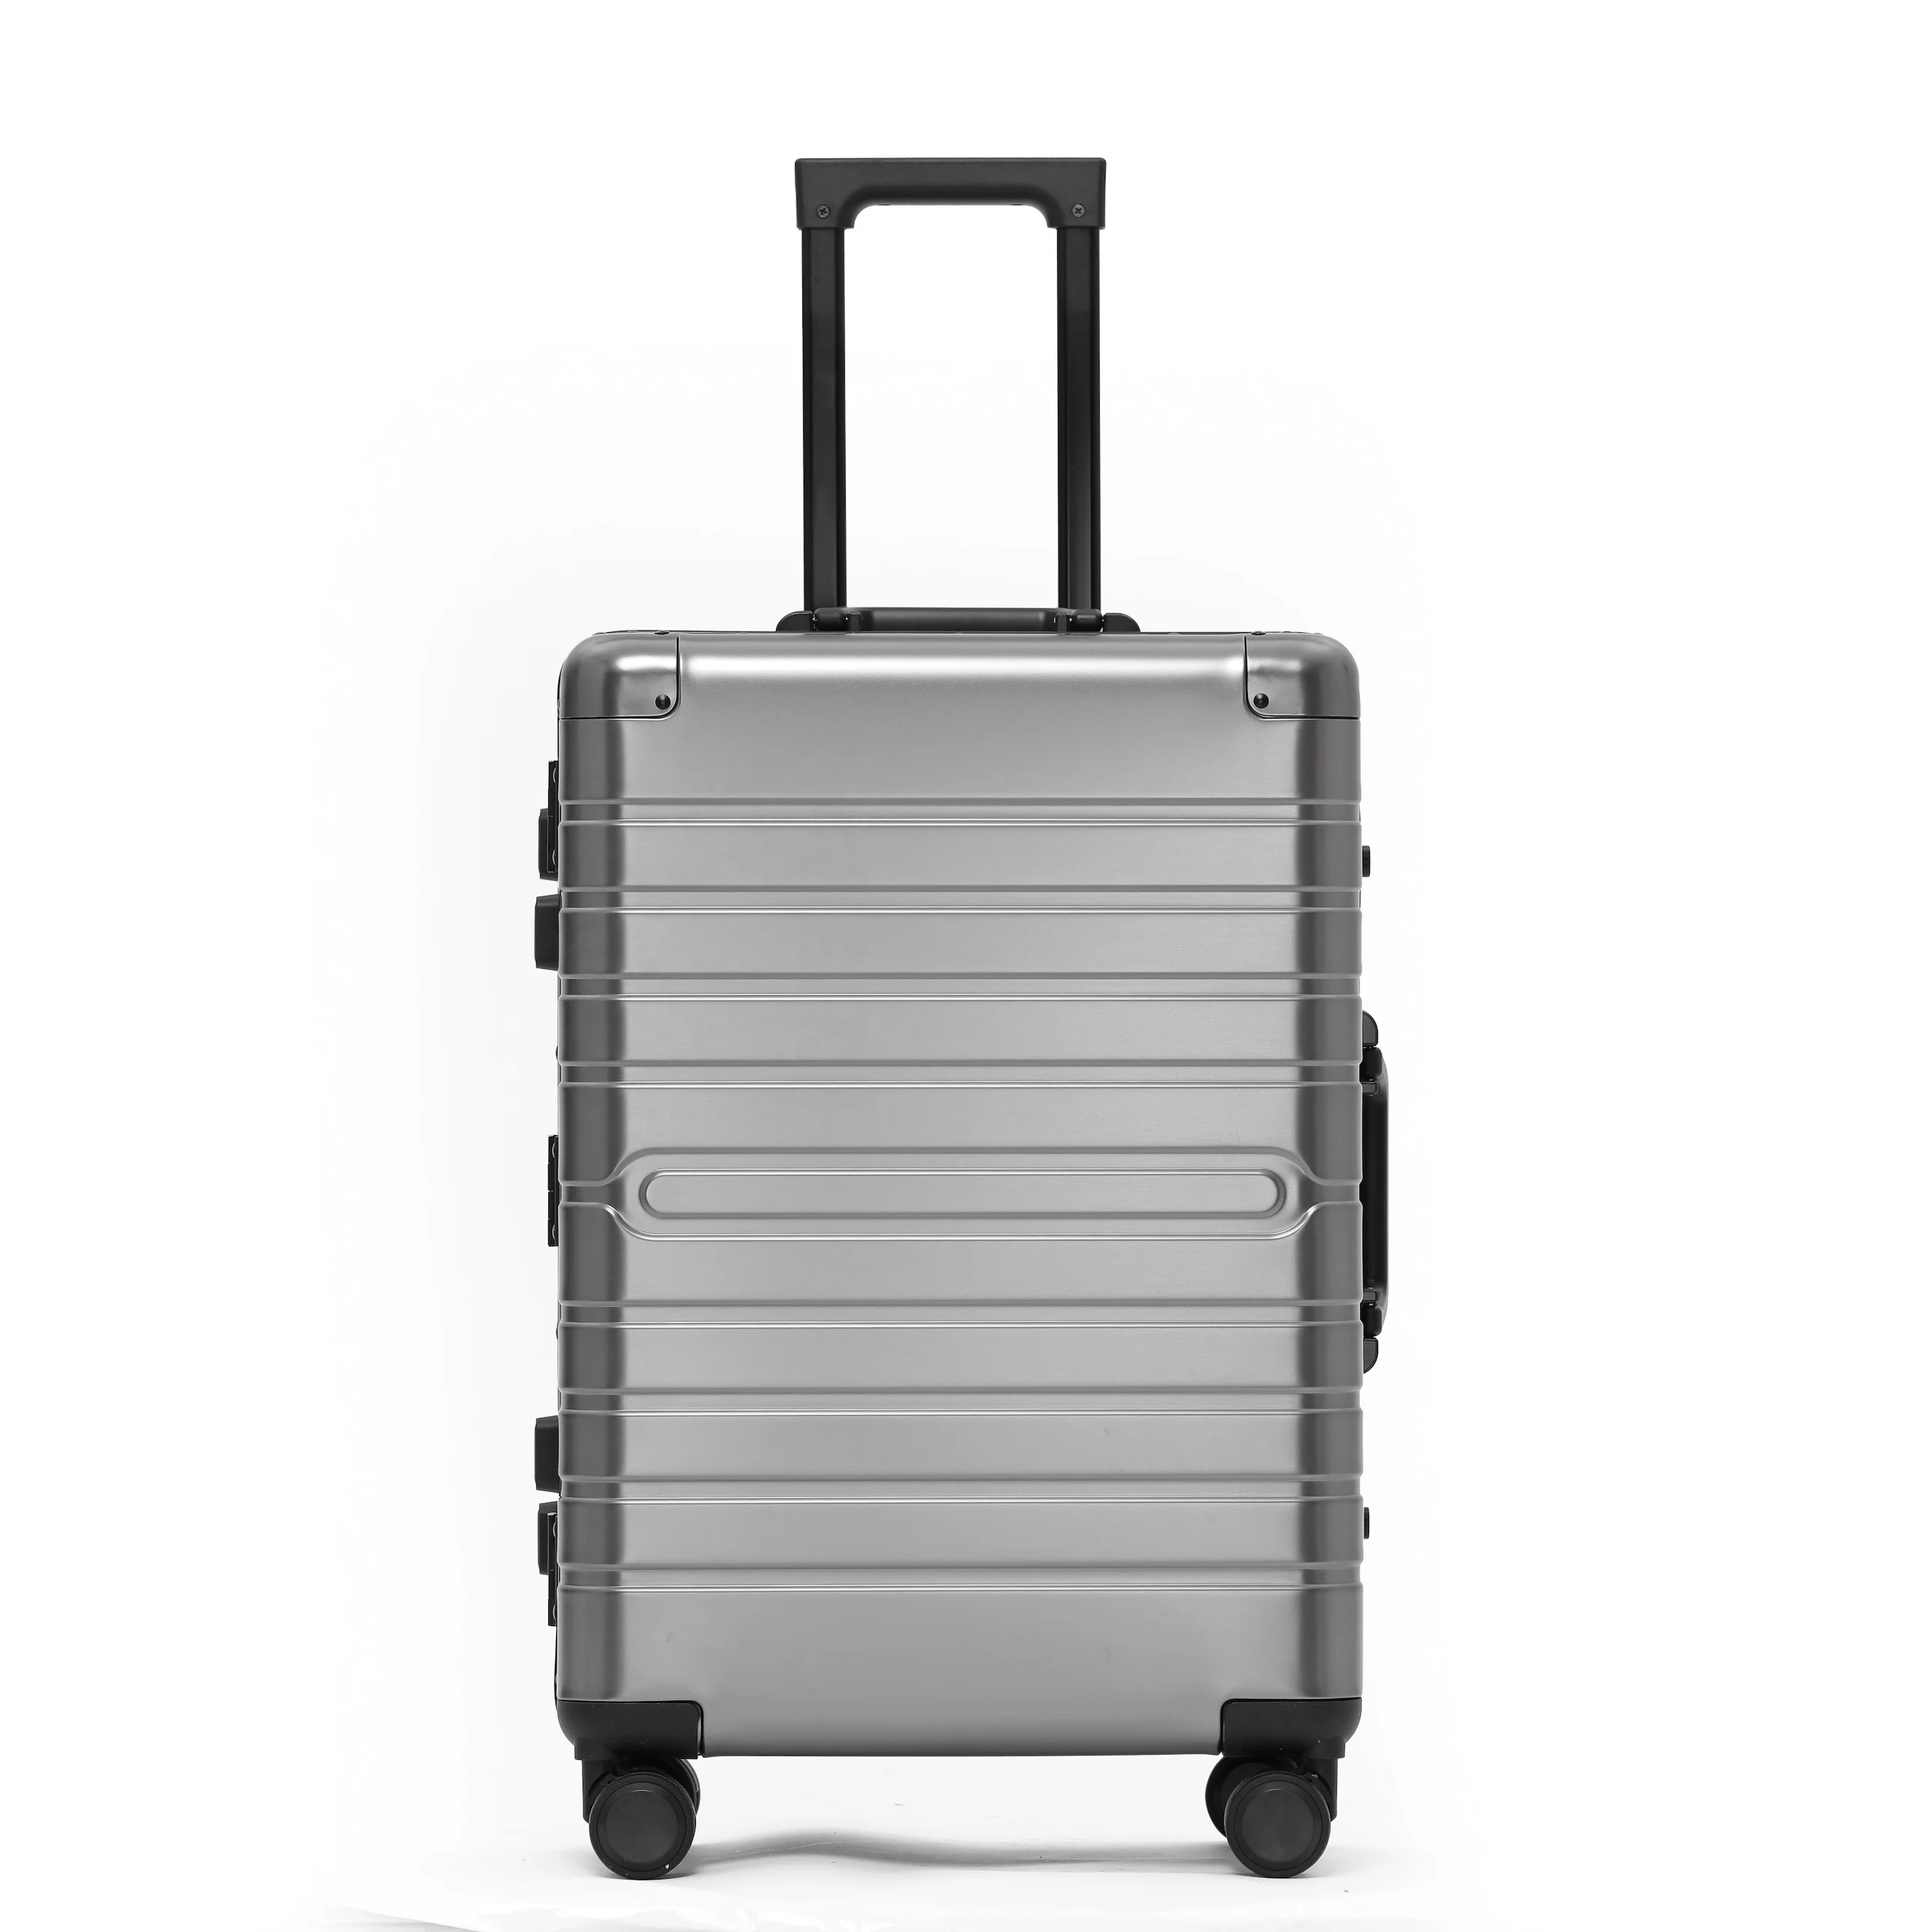 

Brand New Front pocket Full Aluminum Alloy Trolley Suitcase Traveling Luggage Bag Suit Case, Customized colors